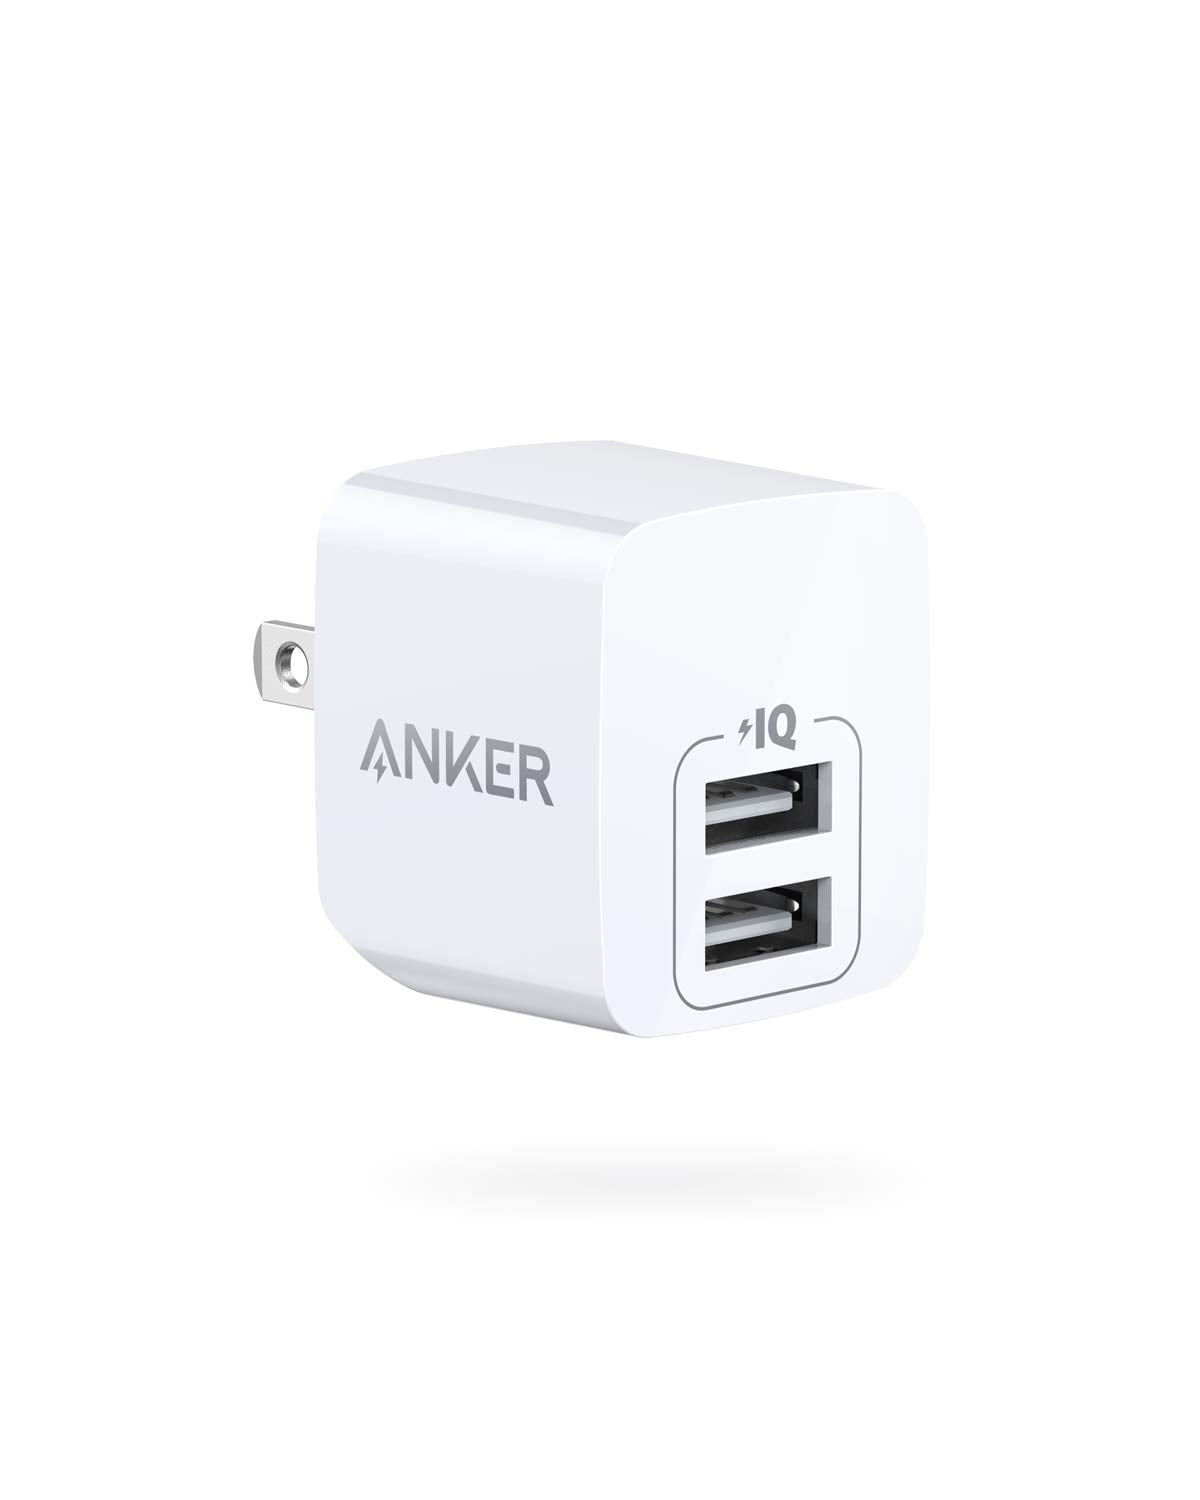 Anker 2-Pack Dual Port 12W Wall Charger with Foldable Plug PowerPort mini for iPhone XS/ X / 8 / 8 Plus / 7 / 6S / 6S Plus HTC iPad and More Samsung Galaxy Note 5 / Note 4 Moto USB Charger